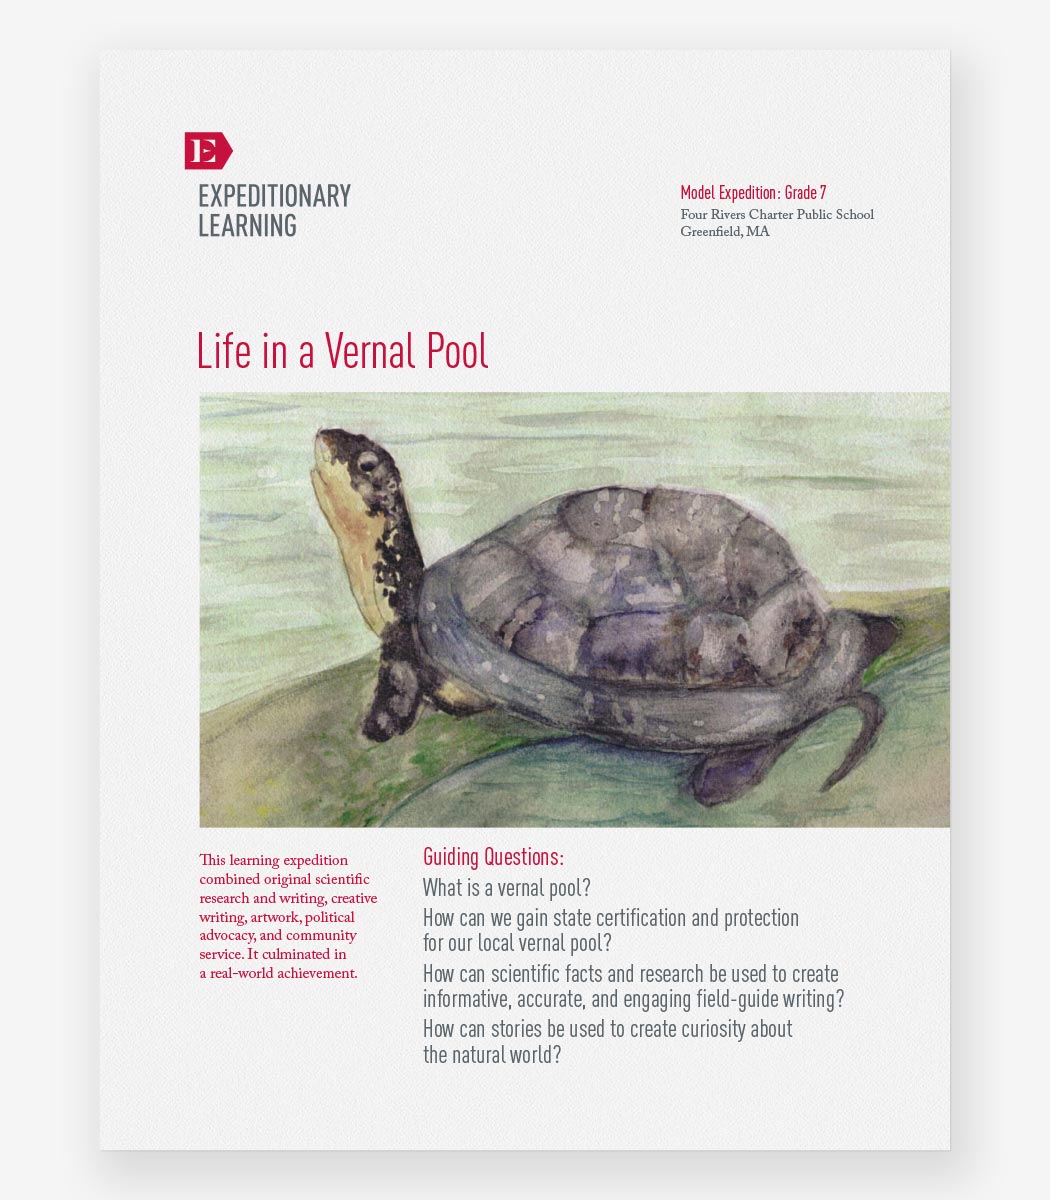 An Expeditionary Learning brochure on the topic "Life in a vernal pool" with an illustrated image of a turtle.